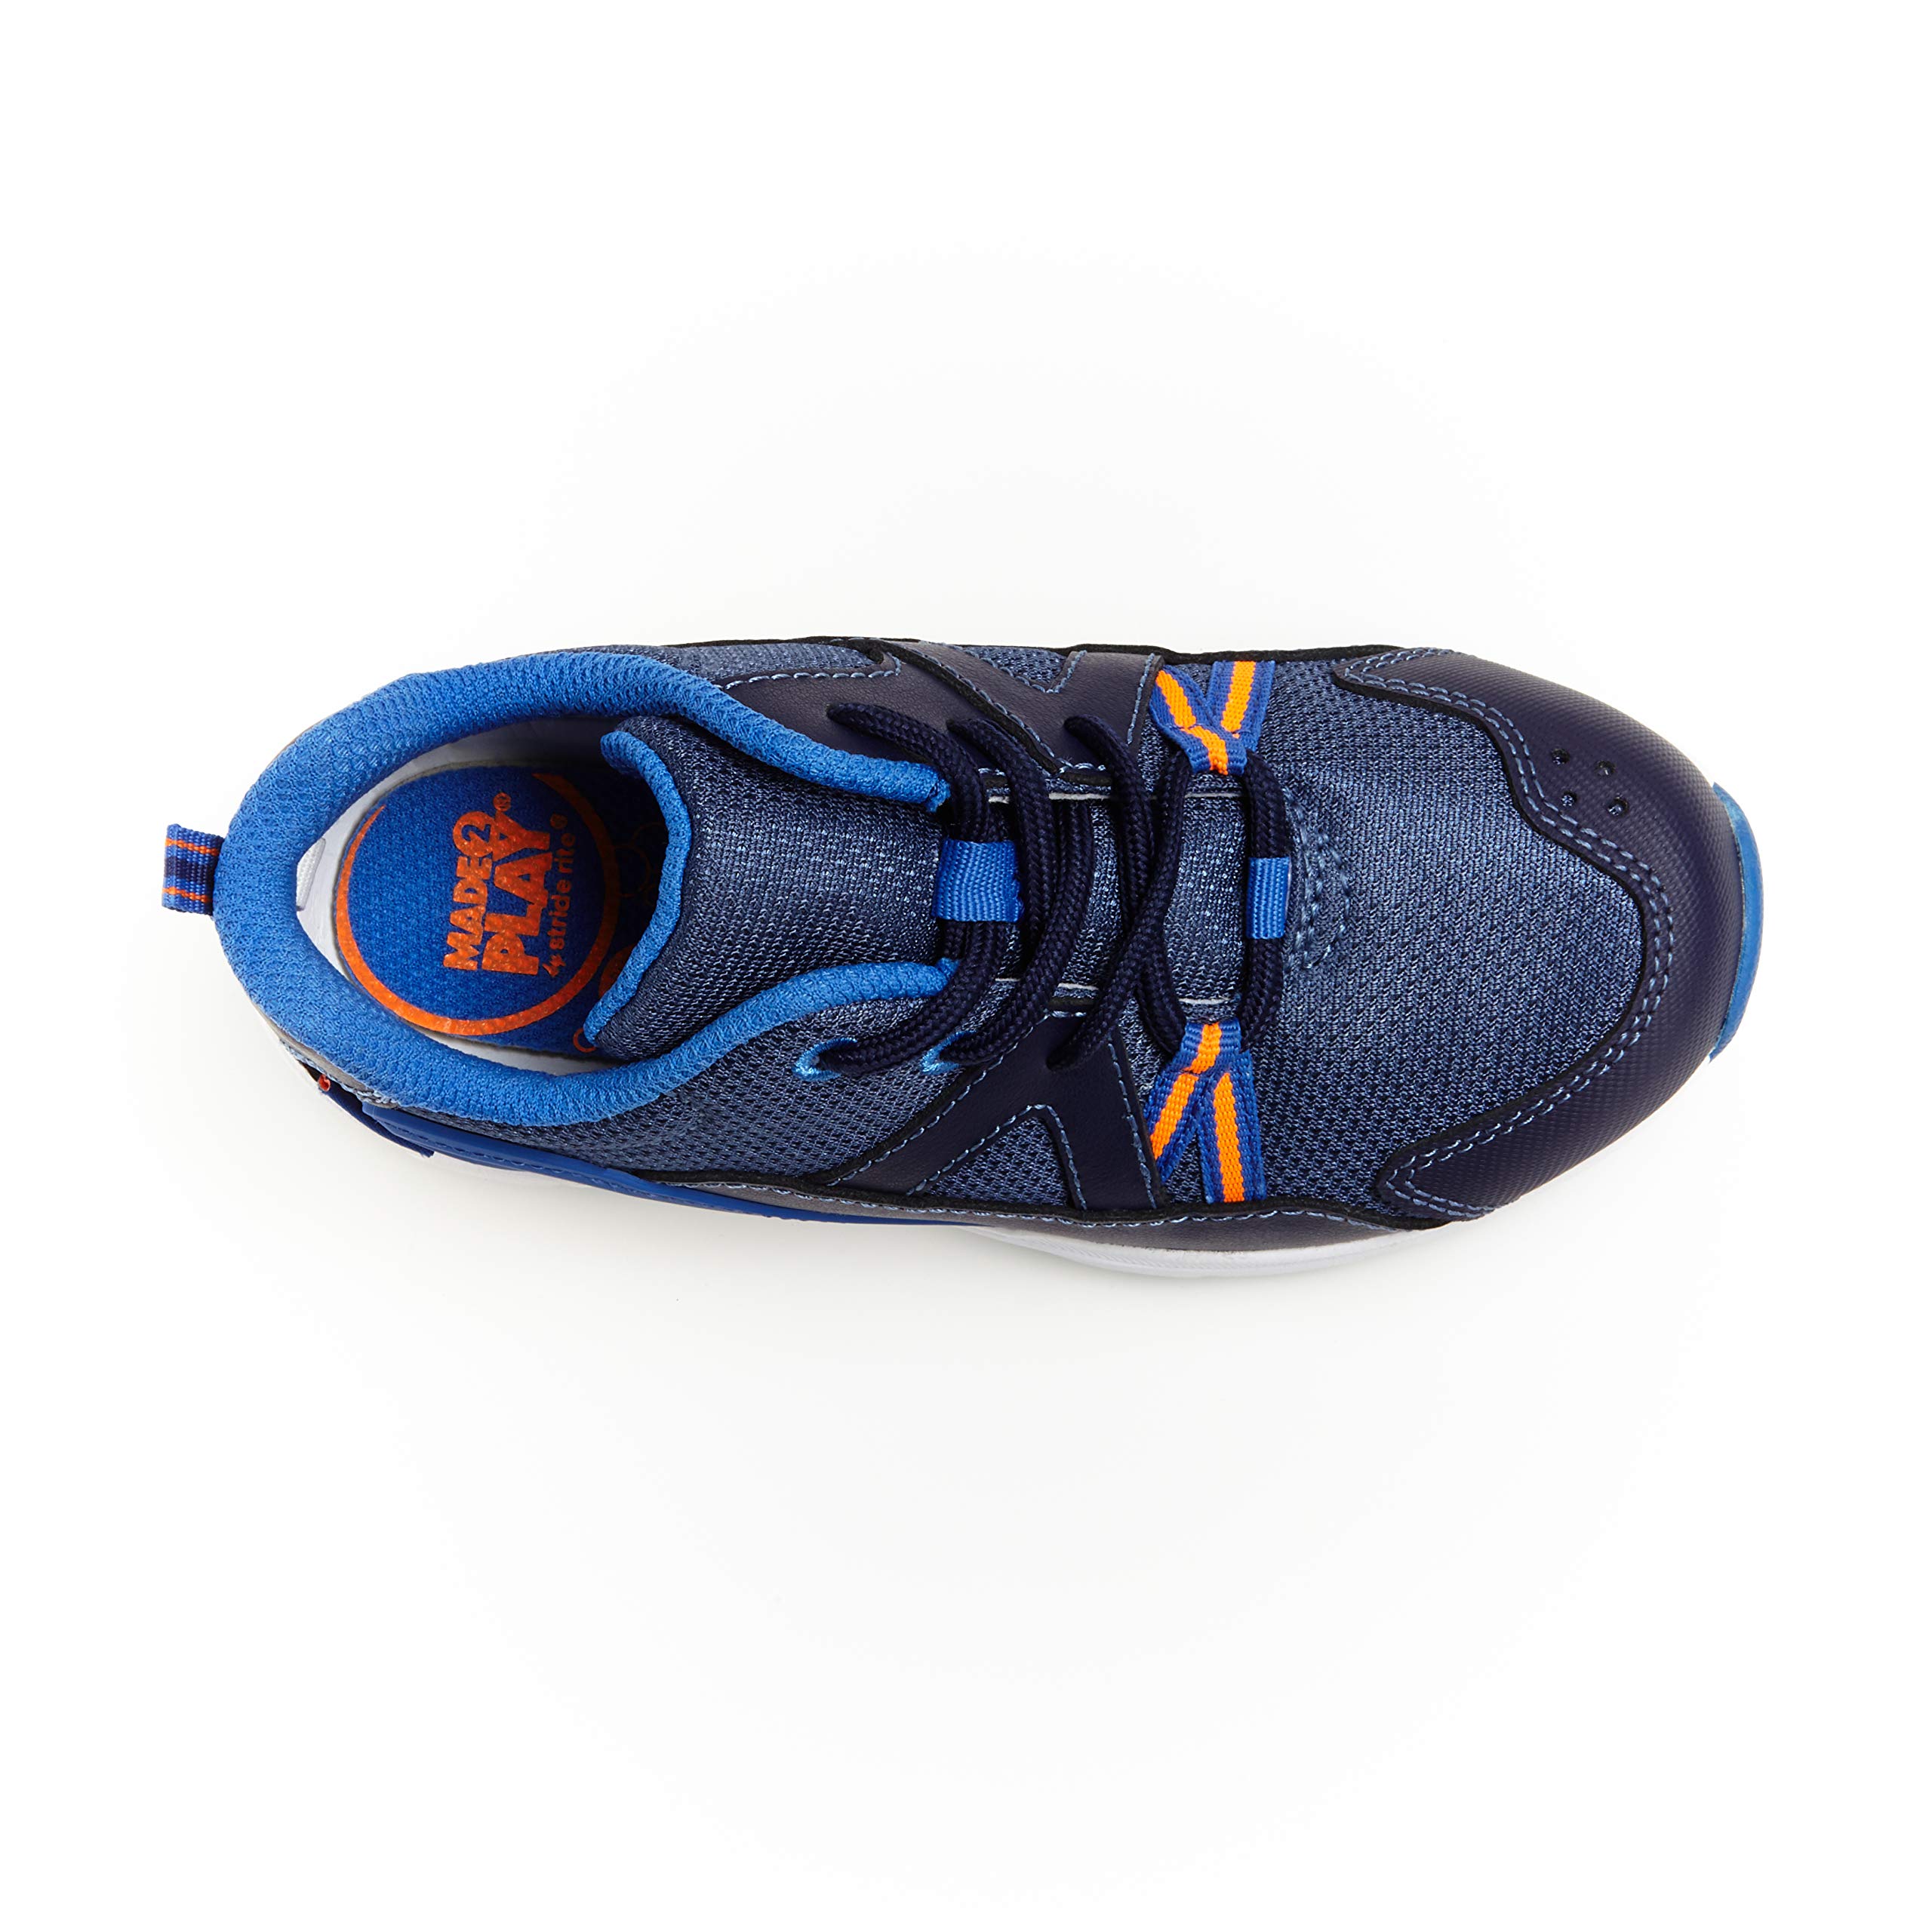 Stride Rite Kids' Made2Play Athletic Journey Sneakers, Navy